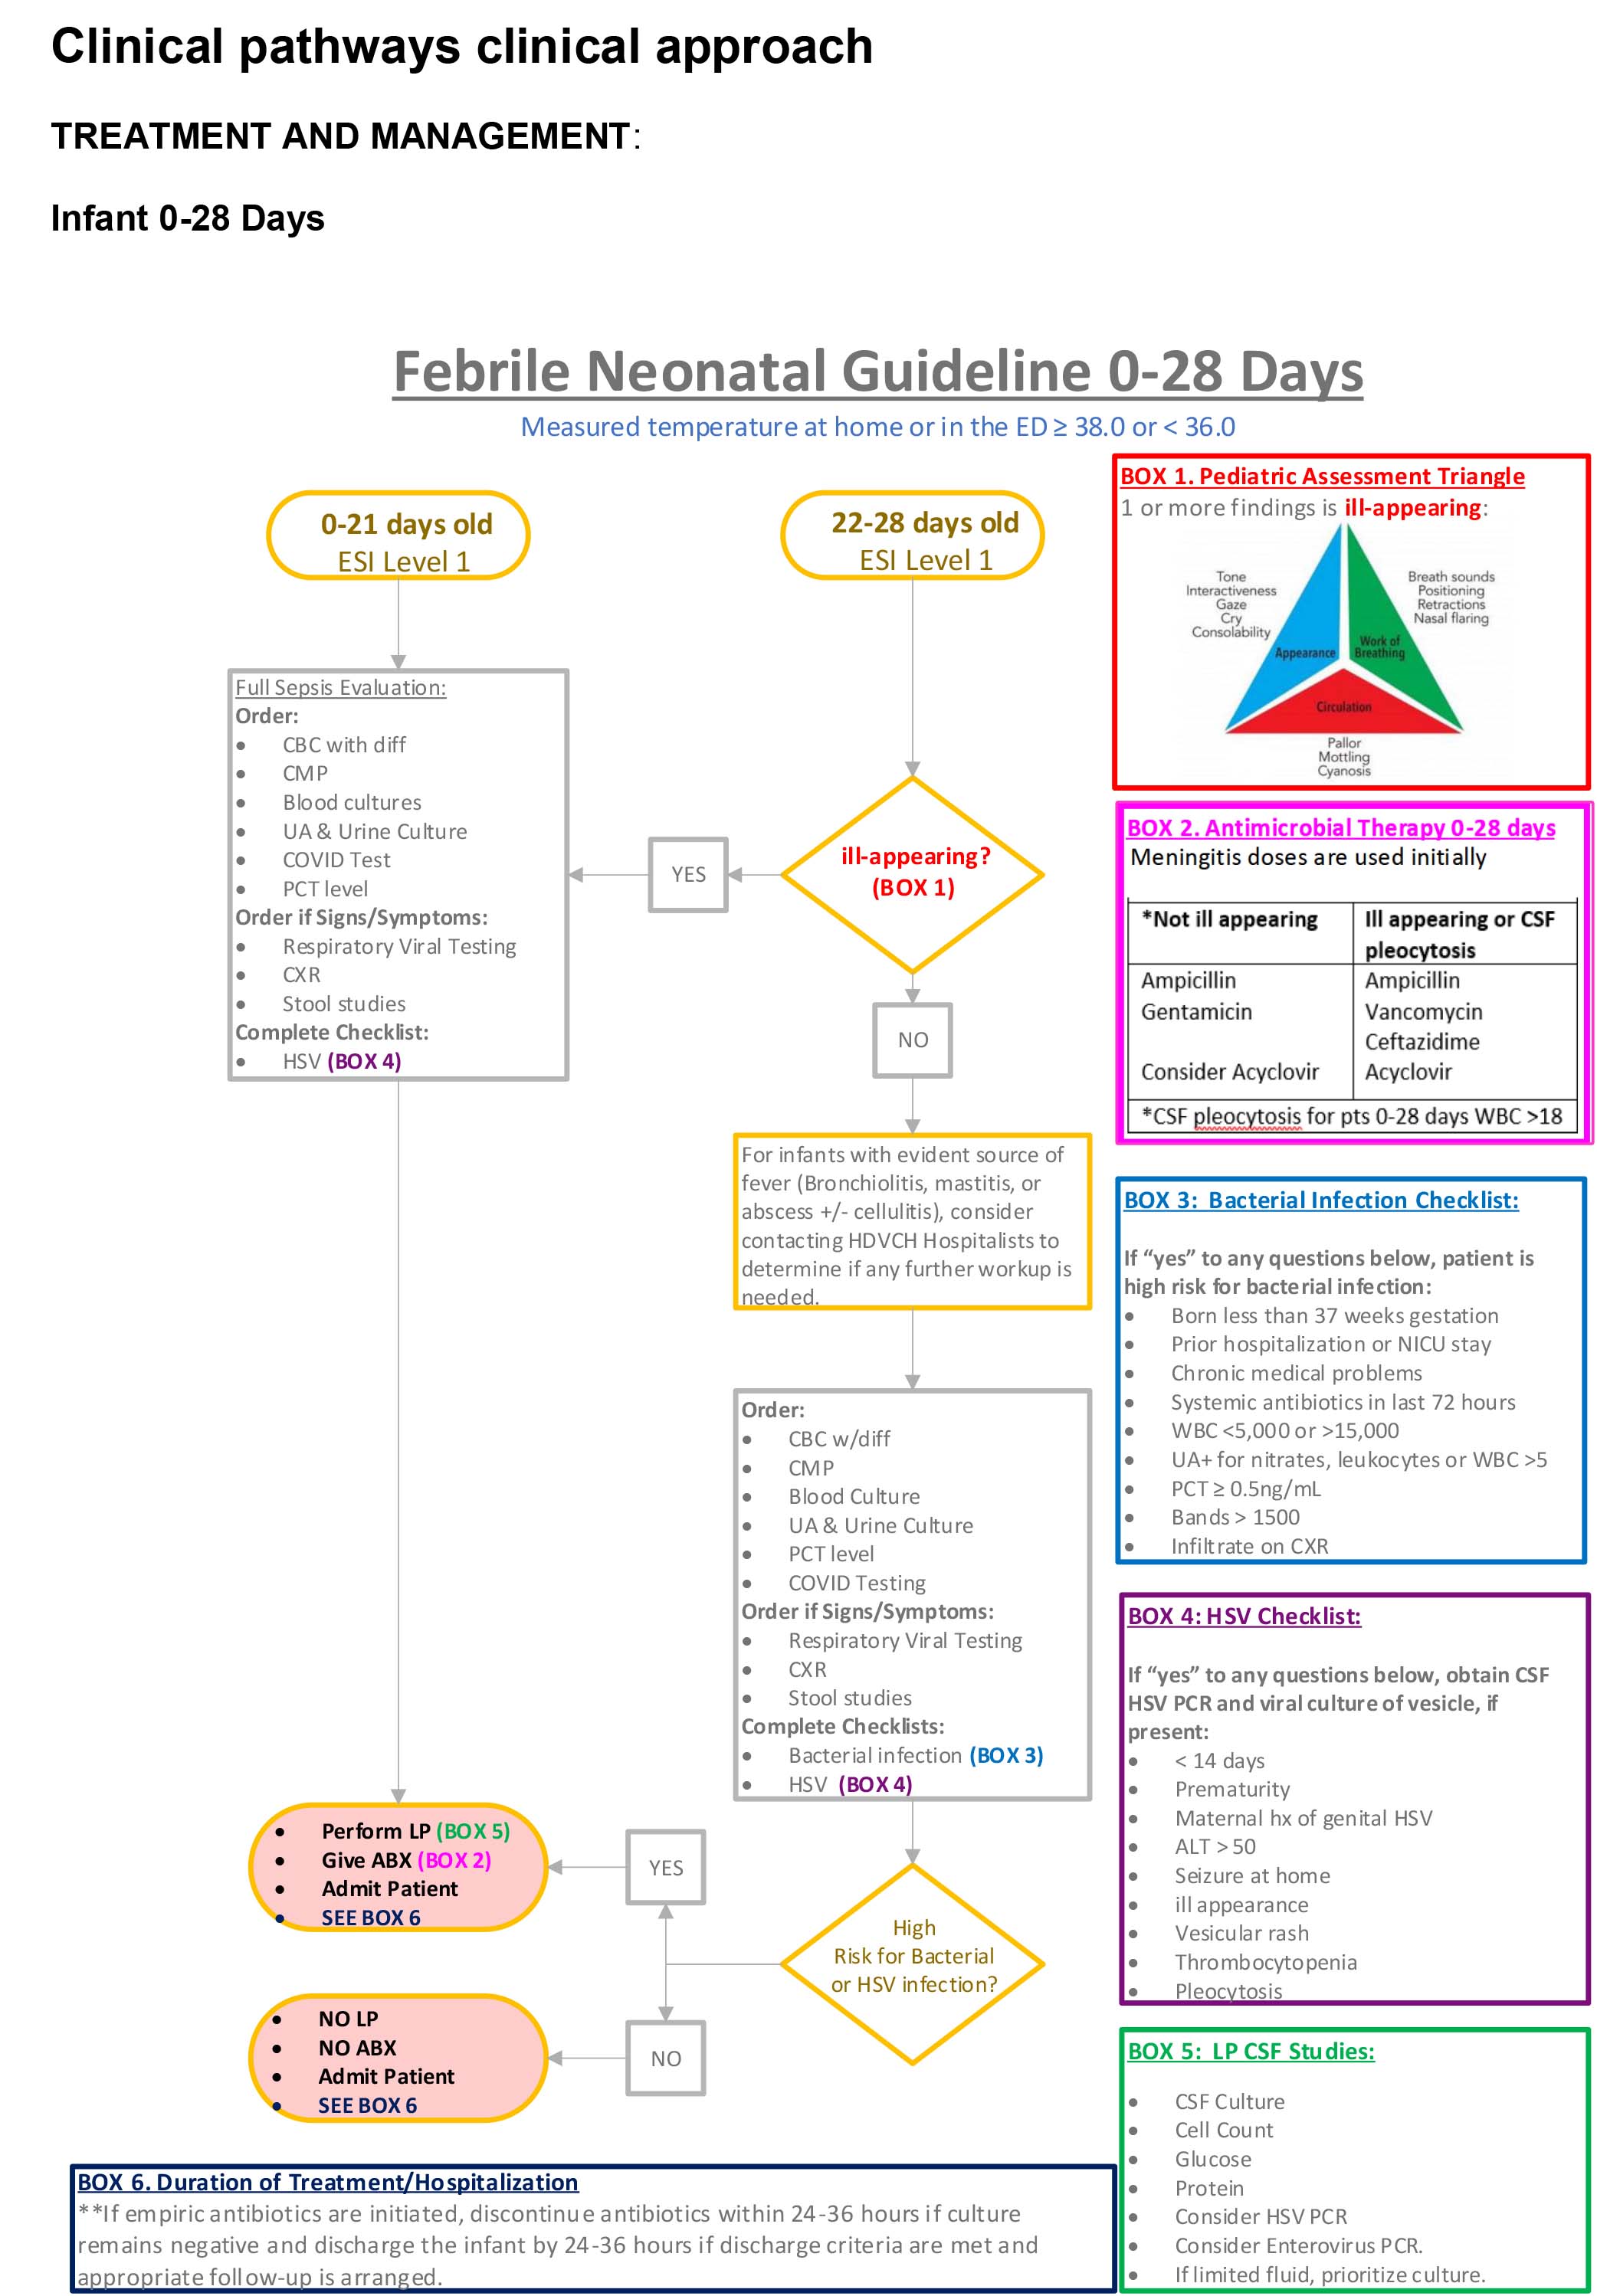 Clinical Guidelines Document Image 3